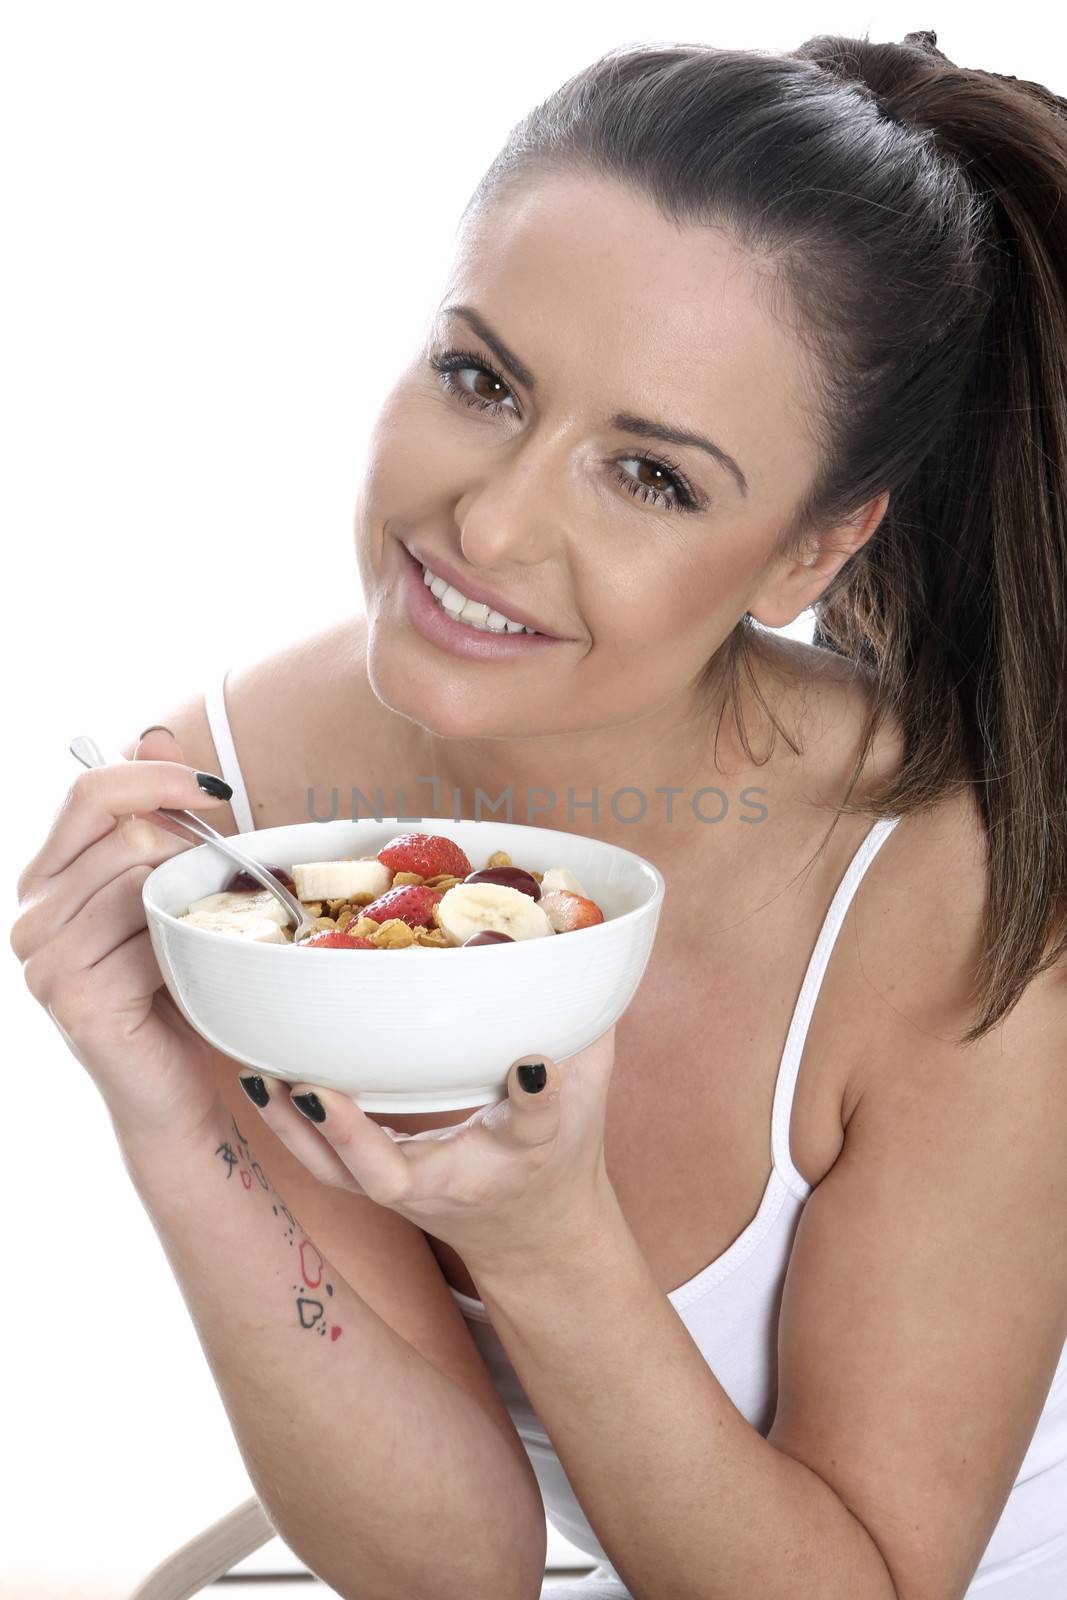 Model Released. Young Woman Eating Breakfast Cereal and Fruit